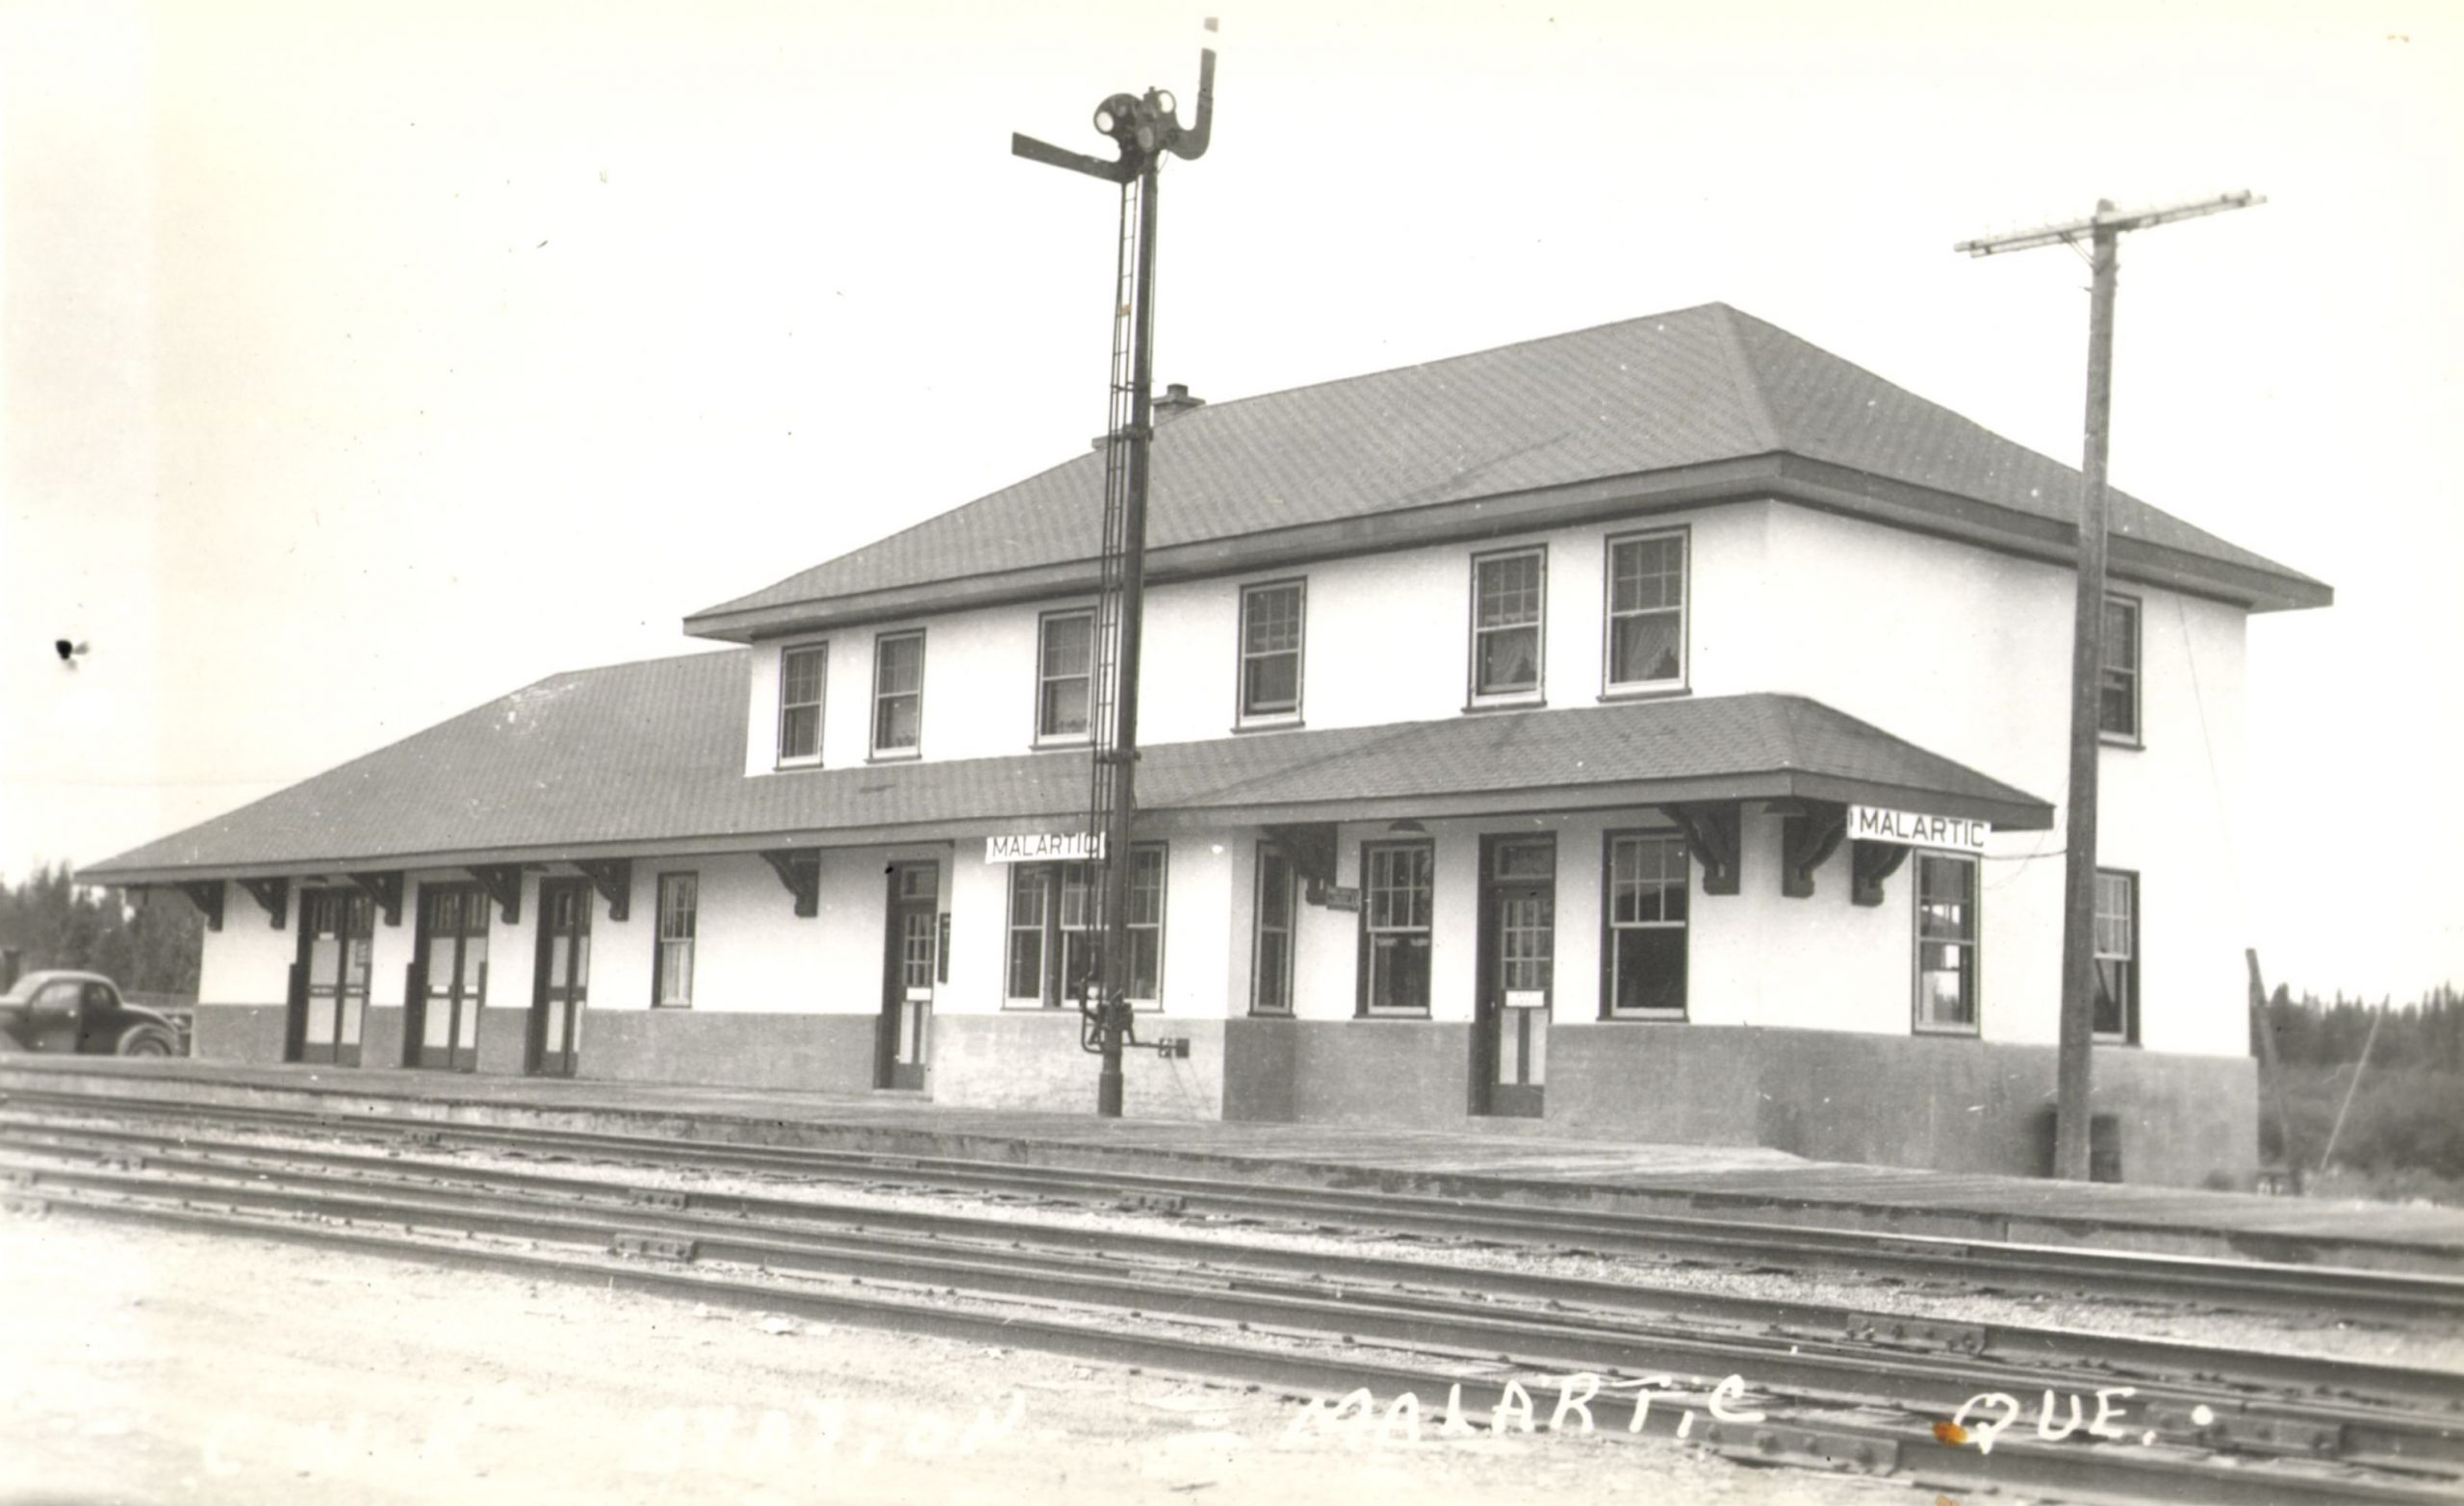 Black and white photograph of a good-quality, two-storey building. In two places, posters bearing the name of the locality: "Malartic". In the foreground, several railway tracks. The photo bears the inscription "Malartic Que".